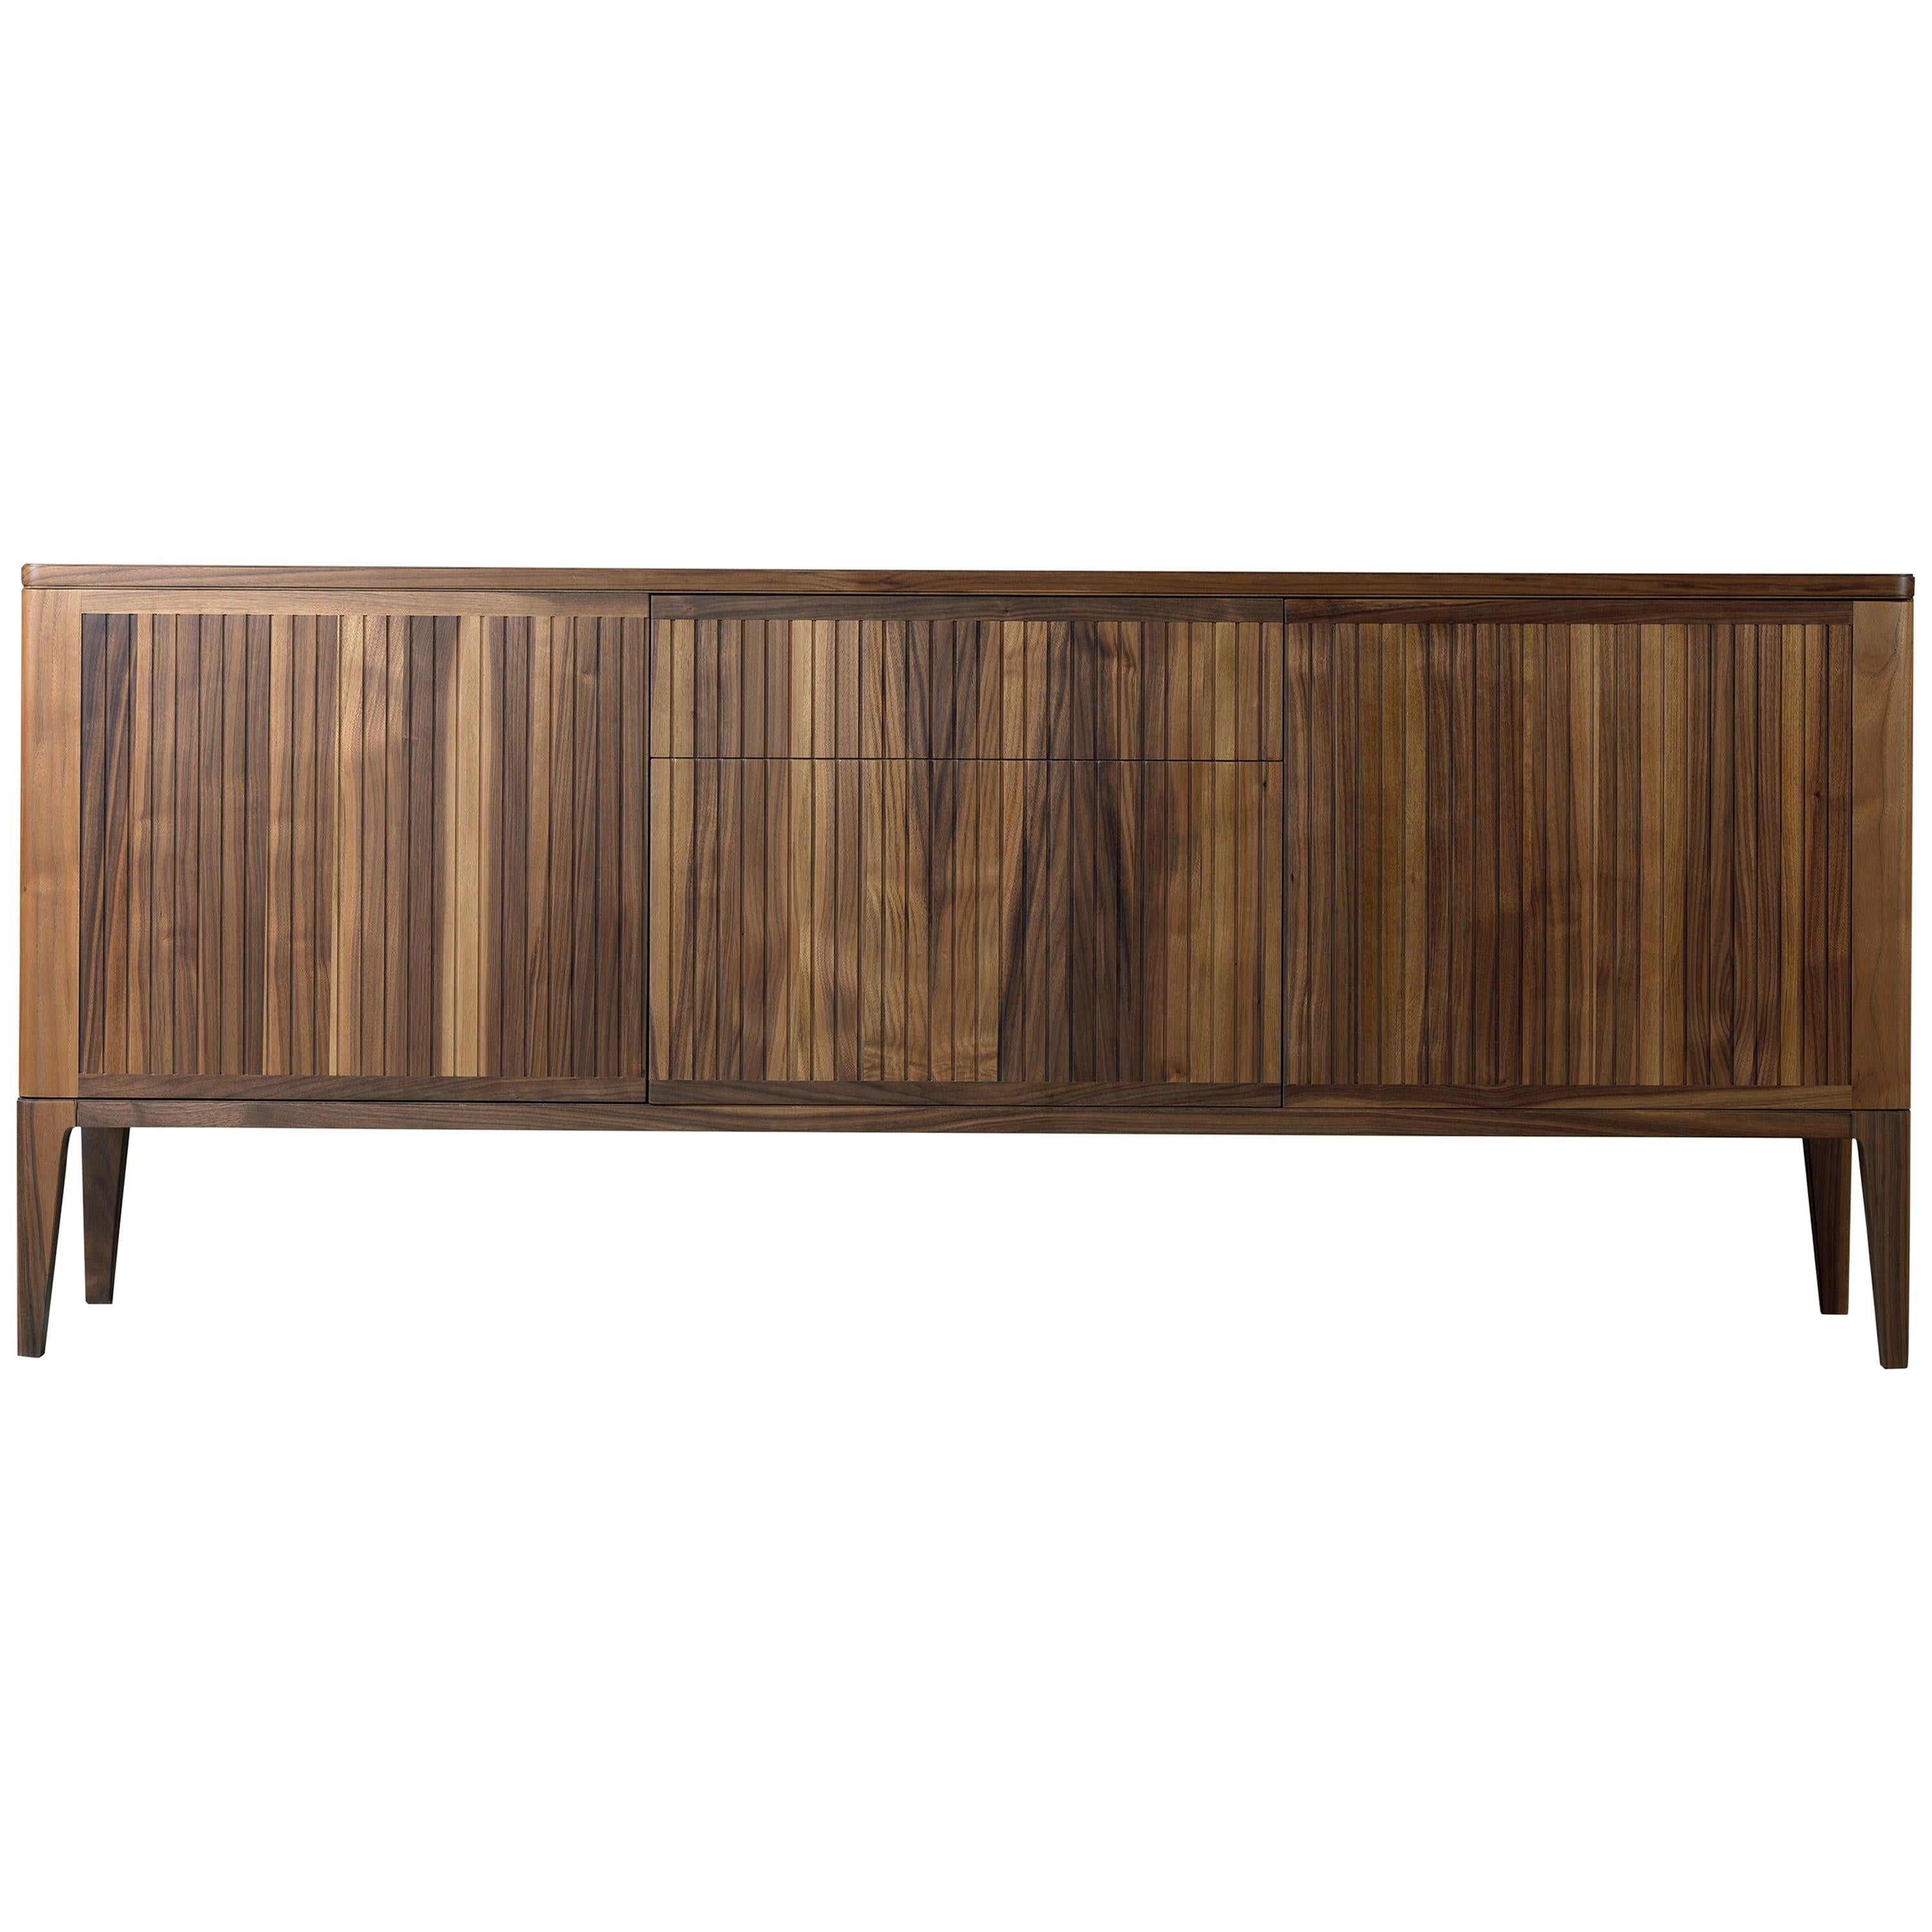 Eleva Solid Wood Sideboard, Walnut in Hand-Made Natural Finish, Contemporary For Sale